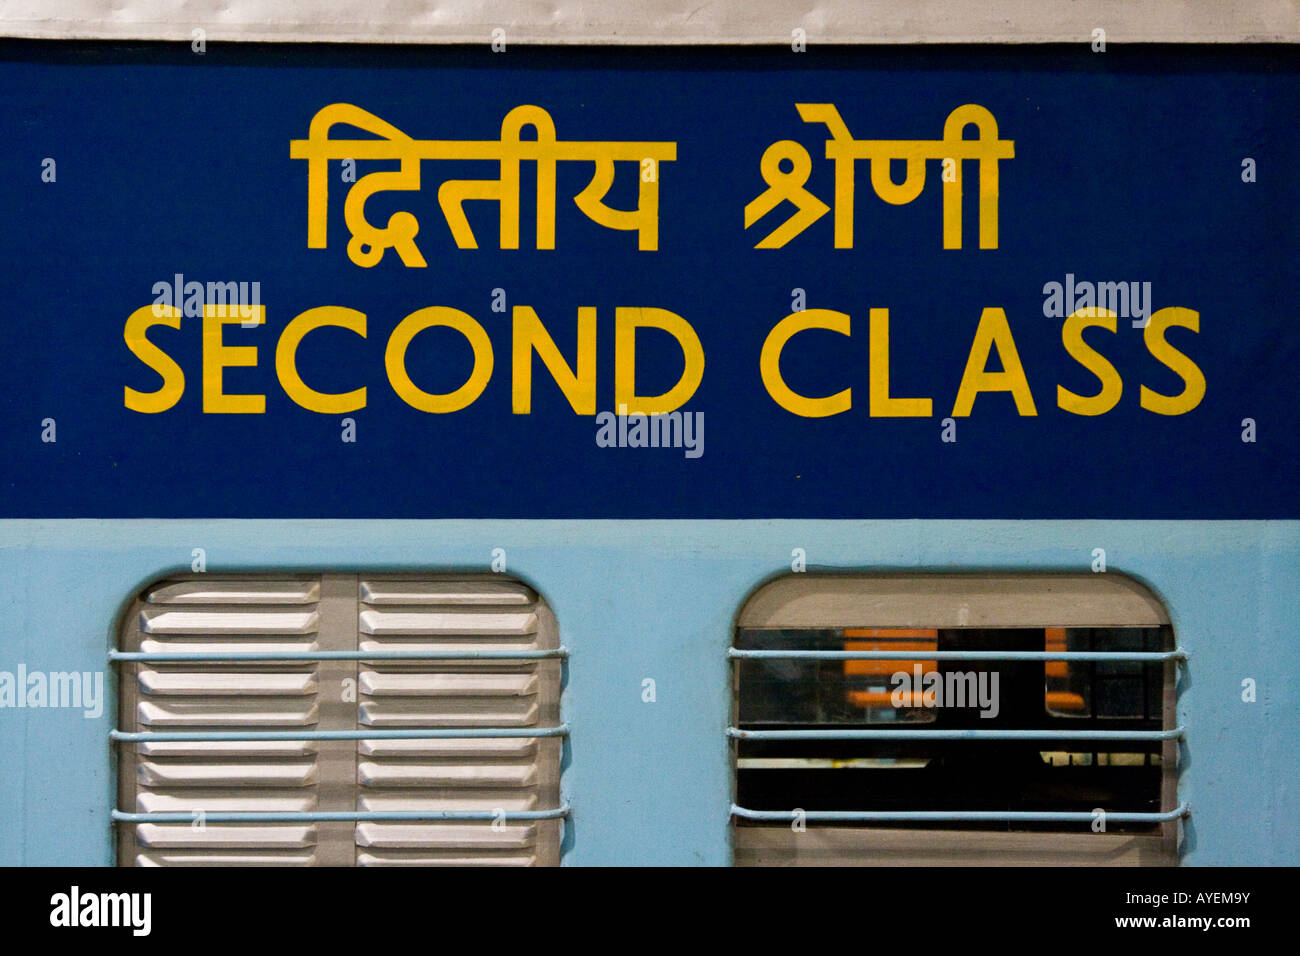 Second Class Train Compartment in Chennai South India Stock Photo